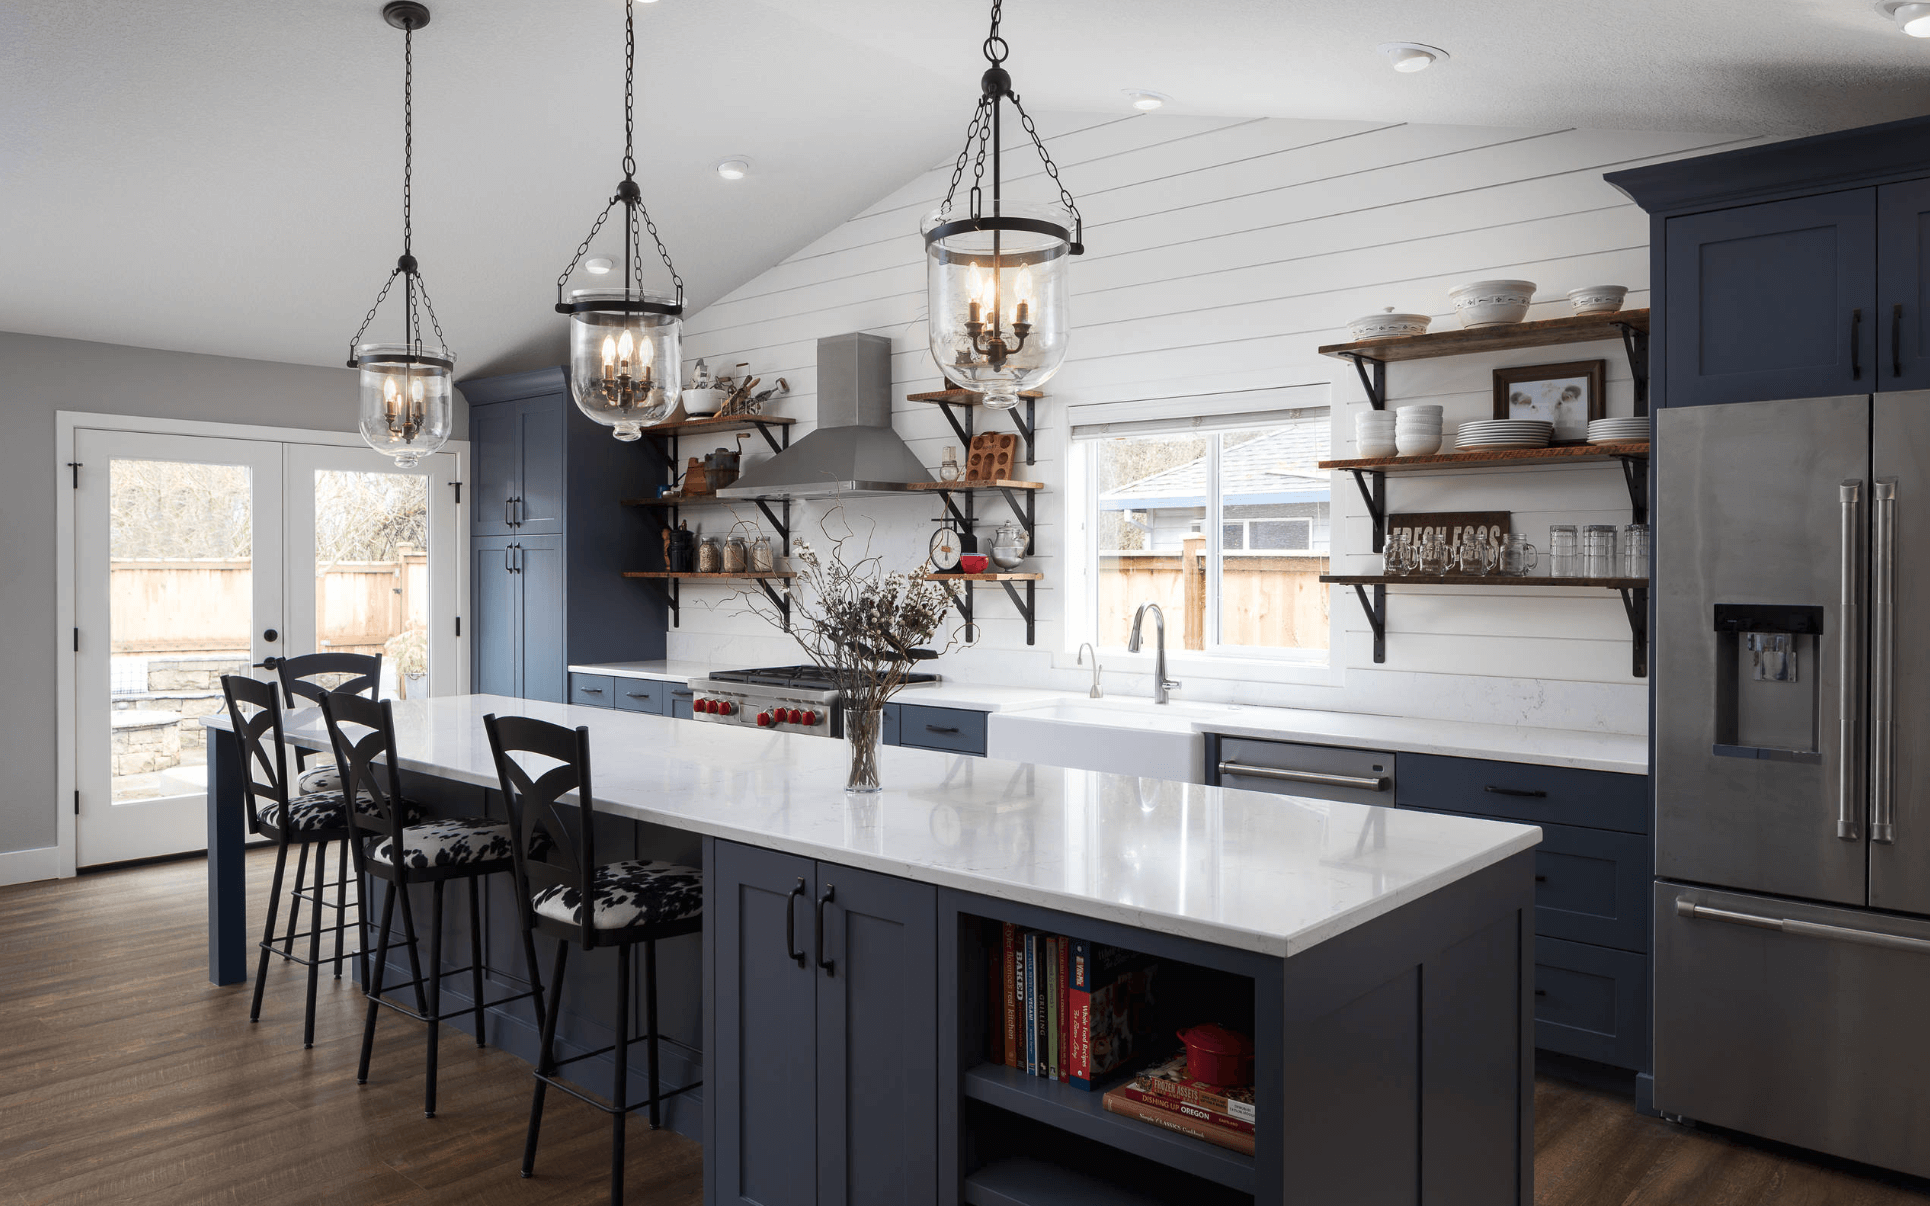 How to Remodel a Home with kitchen